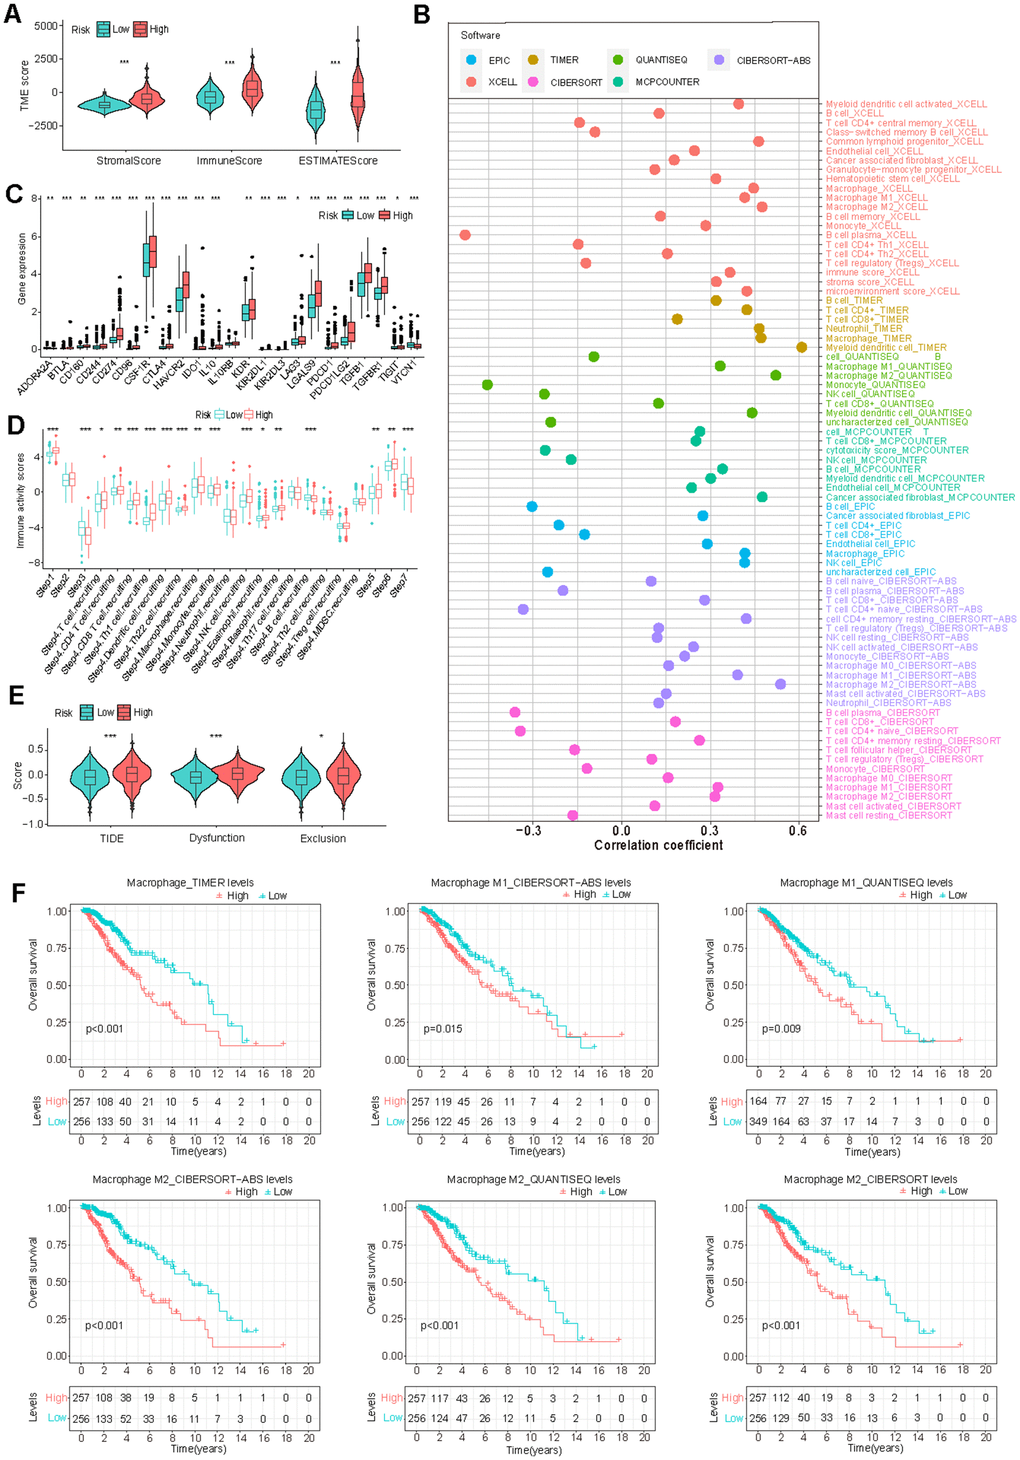 Correlation of GS and tumor immune microenvironment (TIME) characteristics. (A) Variation in TIME scores between high-risk and low-risk groups. (B) Correlation between GS and immune cell infiltration assessed through different immunocyte analysis. (C, D) Differences in the expression of immunosuppressive genes (C) and cancer immune cycle scores (D) between high-risk and low-risk groups. (E) Disparity in Tumor Immune Dysfunction and Exclusion (TIDE) scores between low-risk and high-risk groups. (F) K-M survival analysis based on macrophage infiltration levels in TCGA-LGG patients.